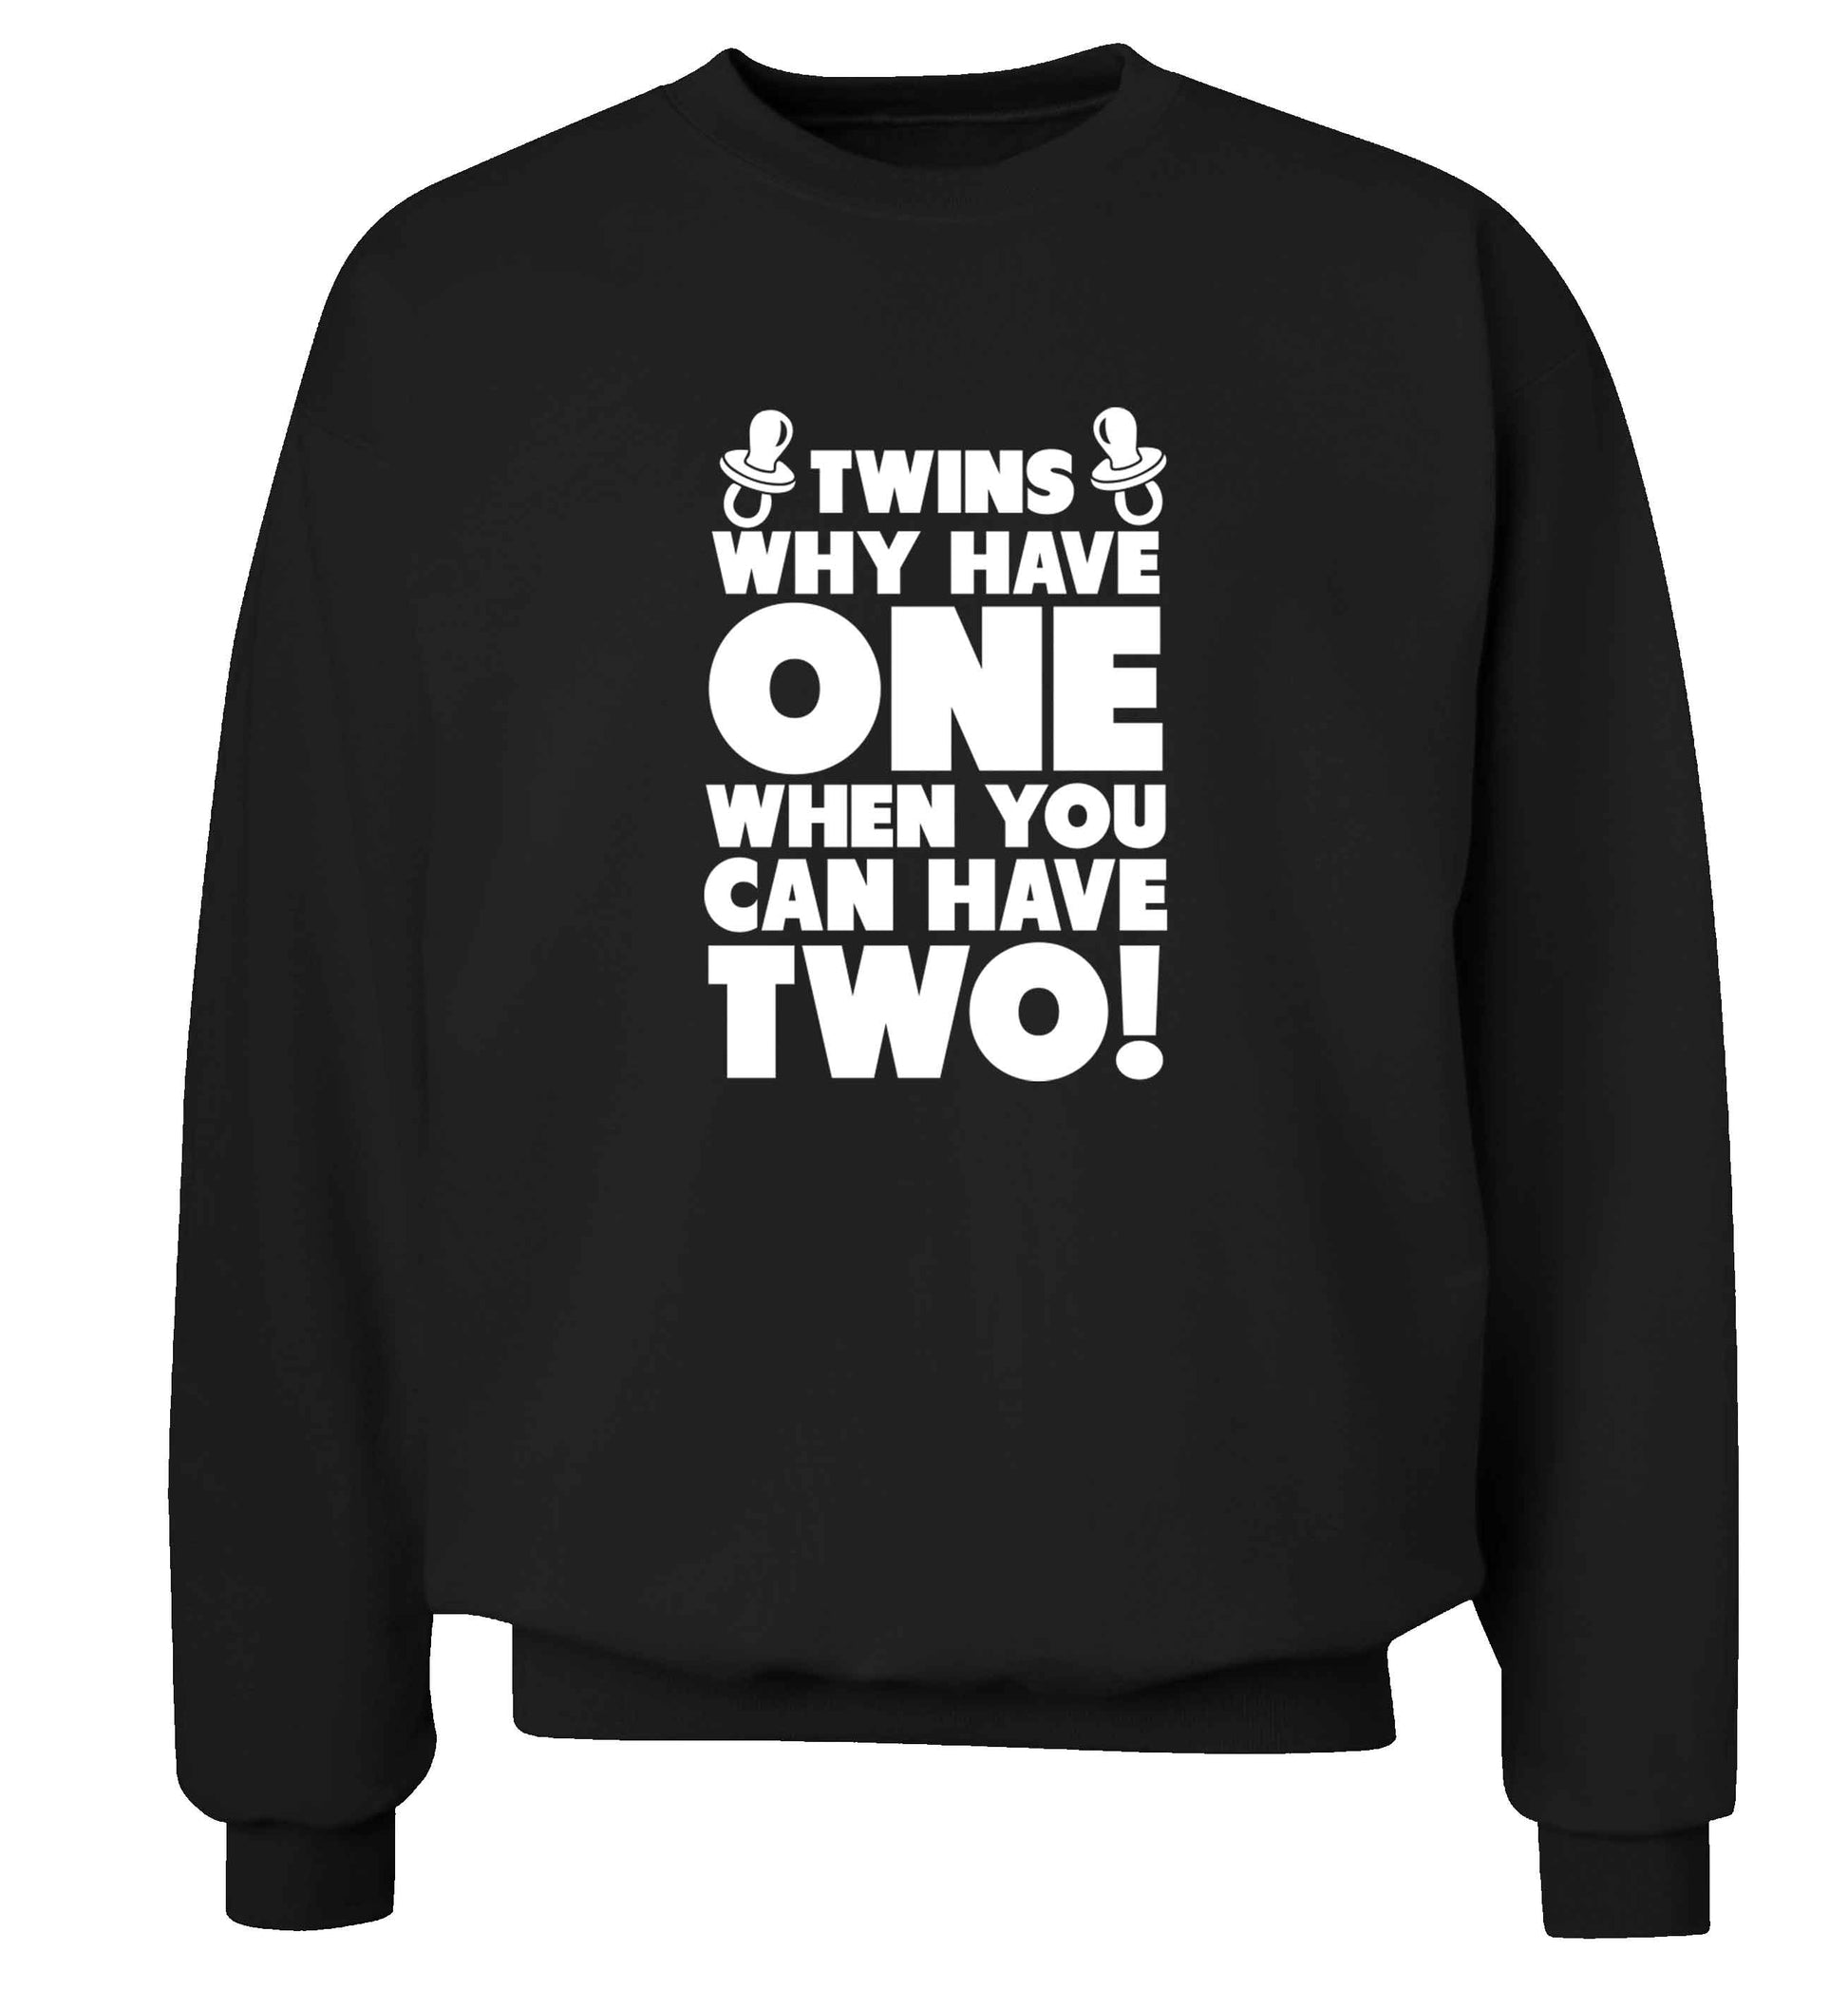 Twins why have one when you can have two adult's unisex black sweater 2XL